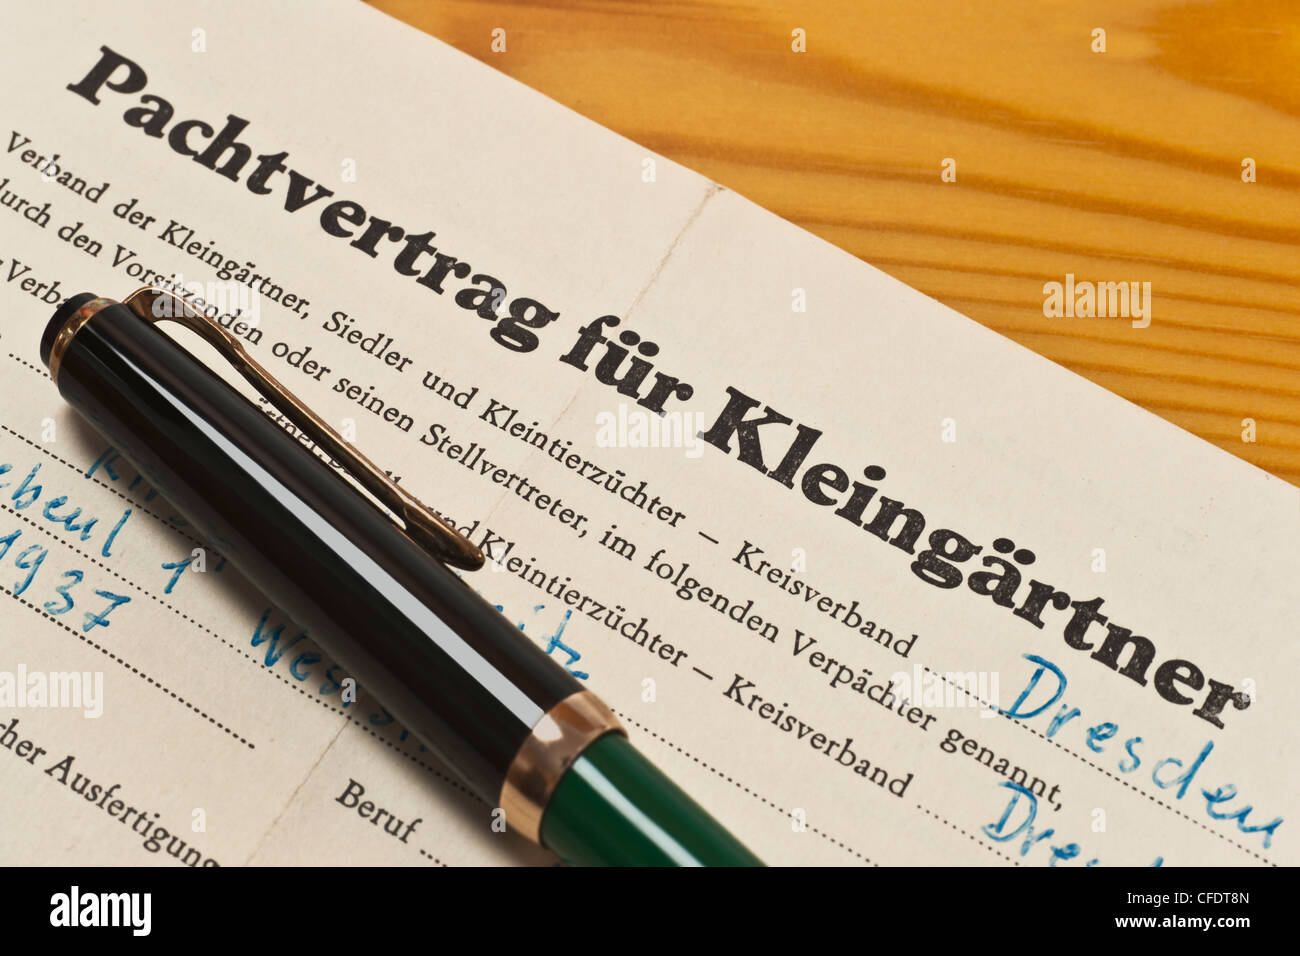 old lease contract for allotment holders from 1968, German language and a fountain pen Stock Photo